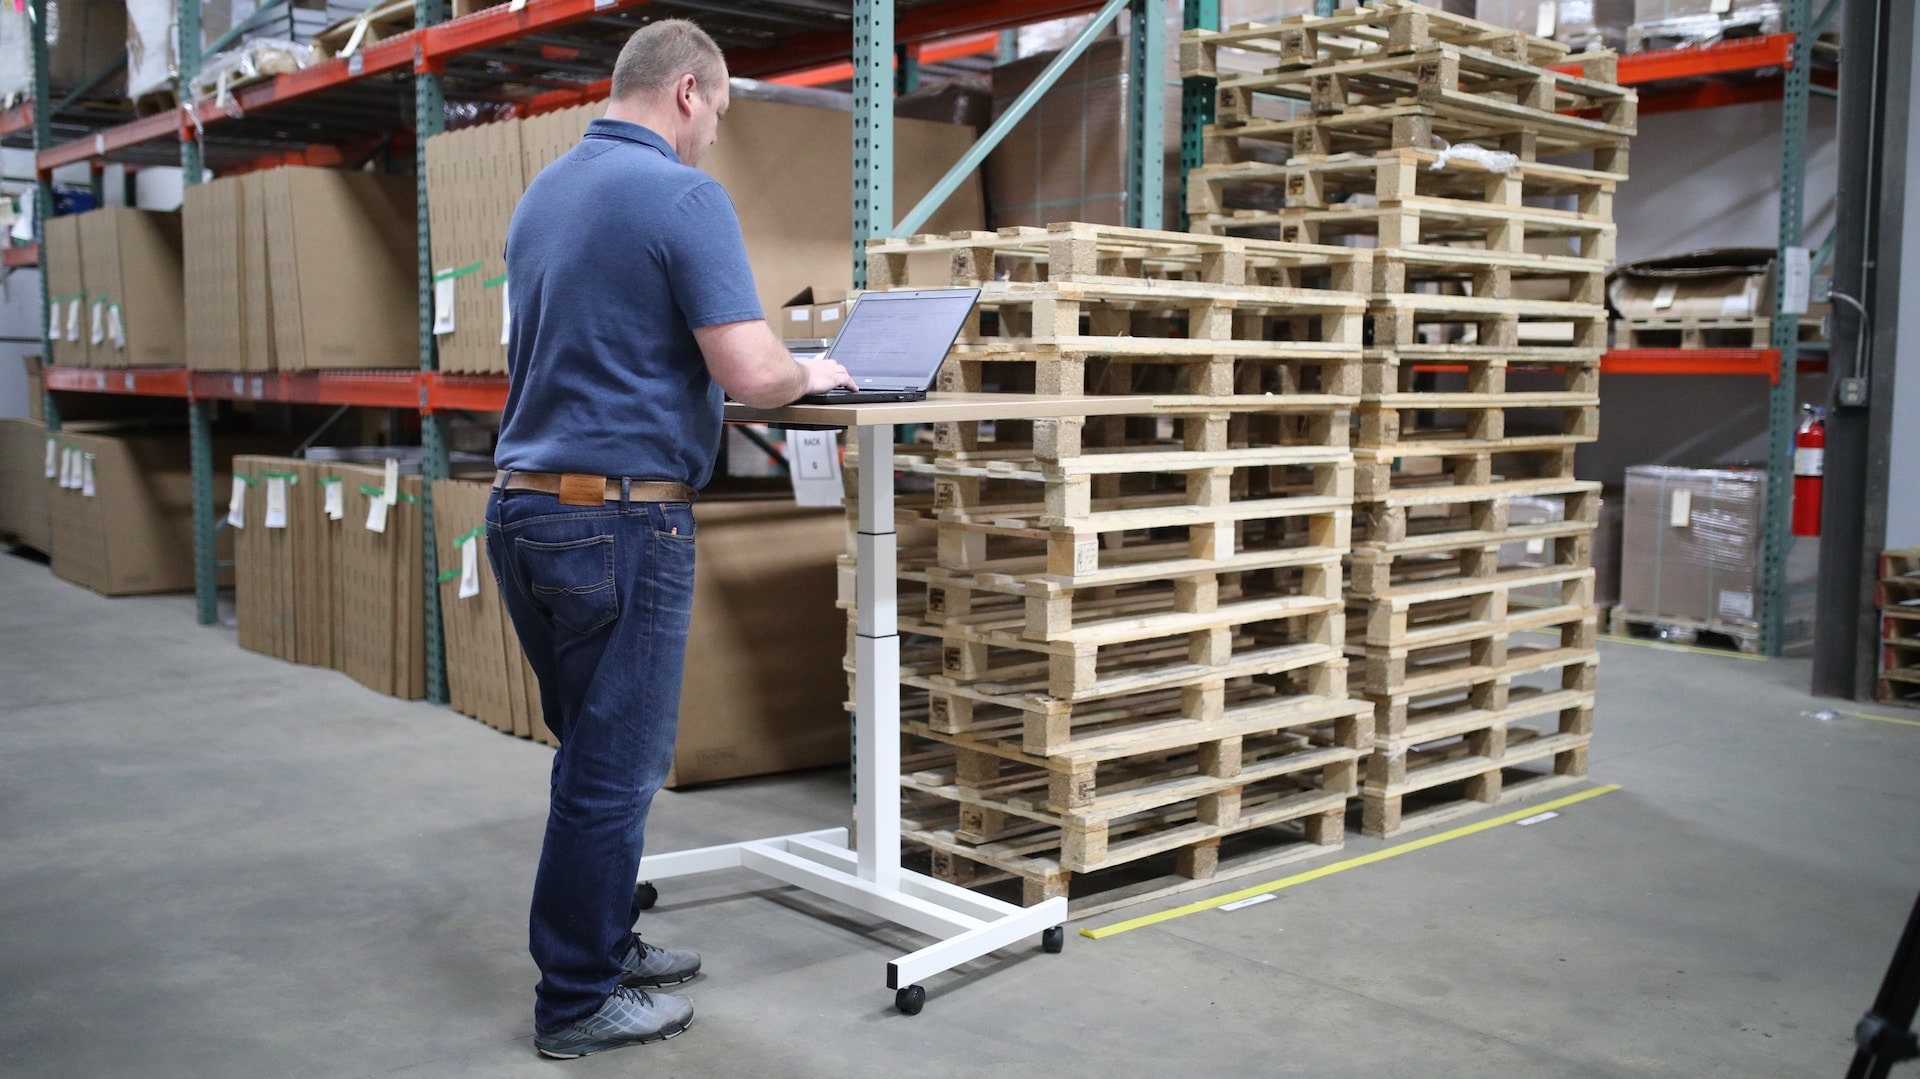 A man uses at a standing desk in the middle of a warehouse